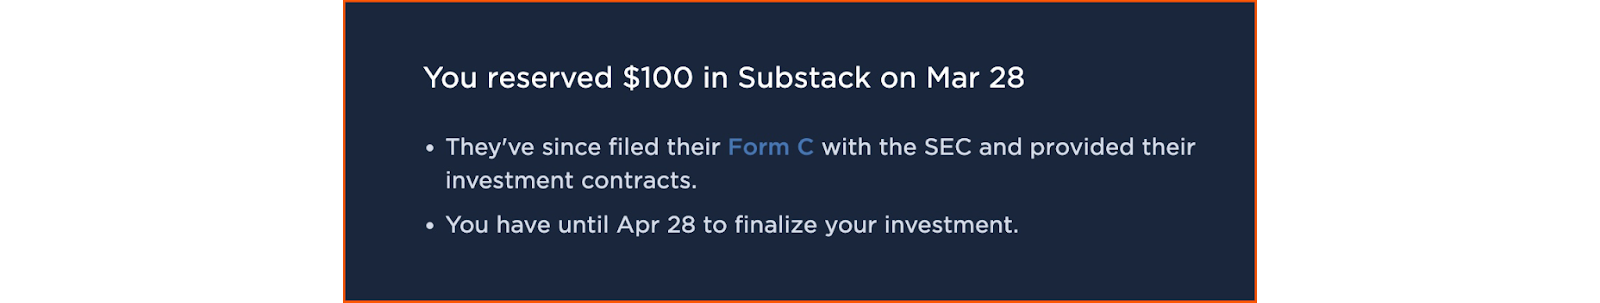 Screenshot of a communication from Substack: “You reserved $100 in Substack on Mar 28 • They’ve since filed their Form C with the SEC and provided their investment contracts. You have until Apr 28 to finalize your investment.